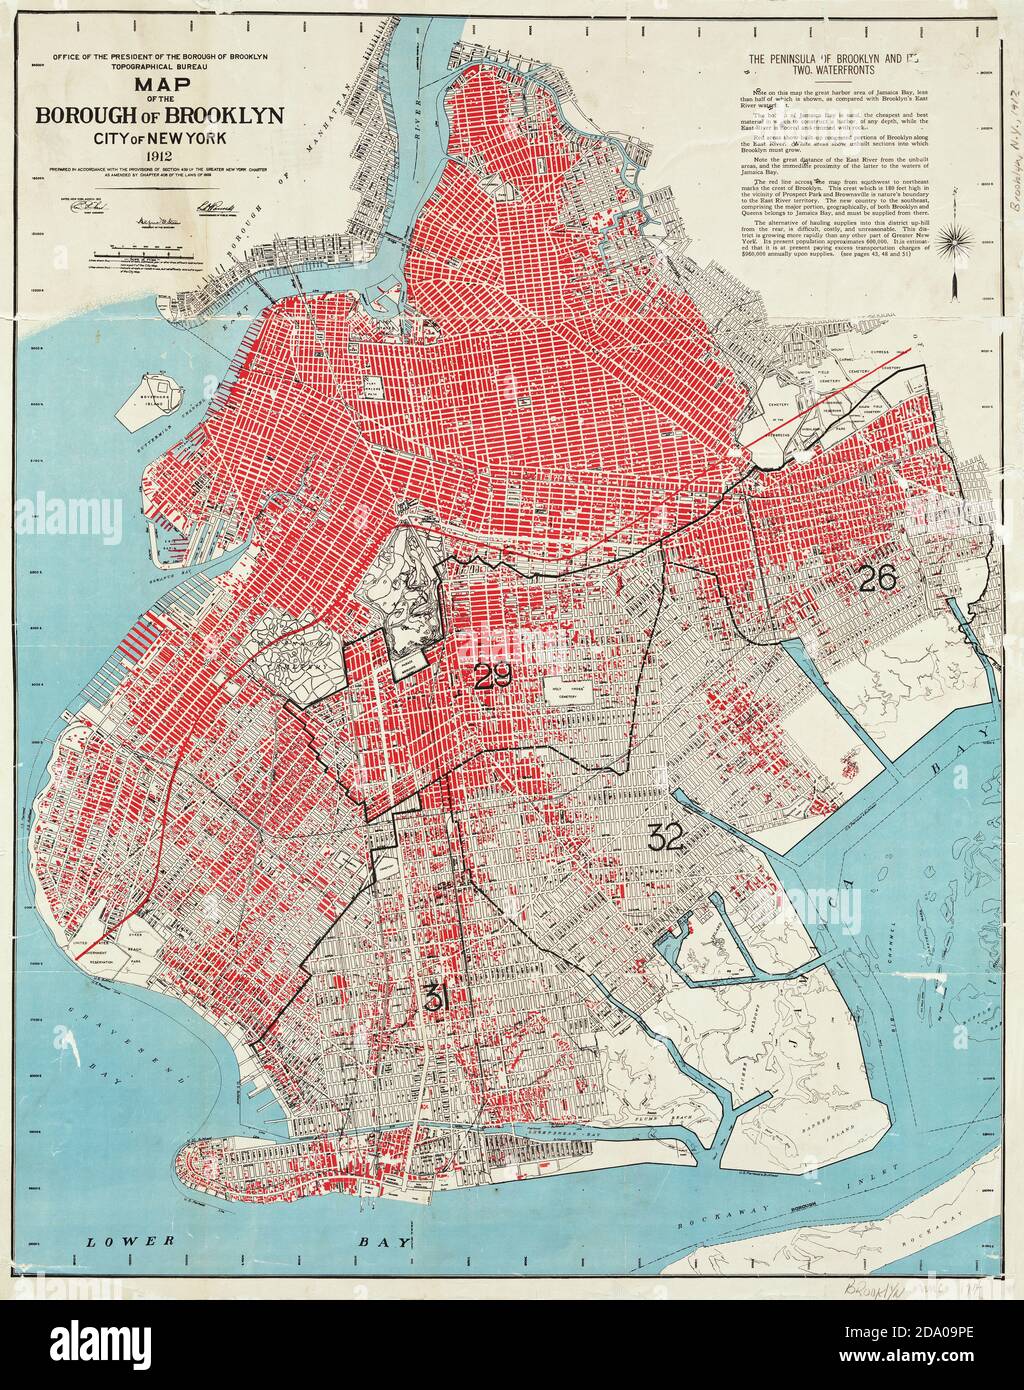 Old map of The Borough of Brooklyn, City of New York 1912. Stock Photo